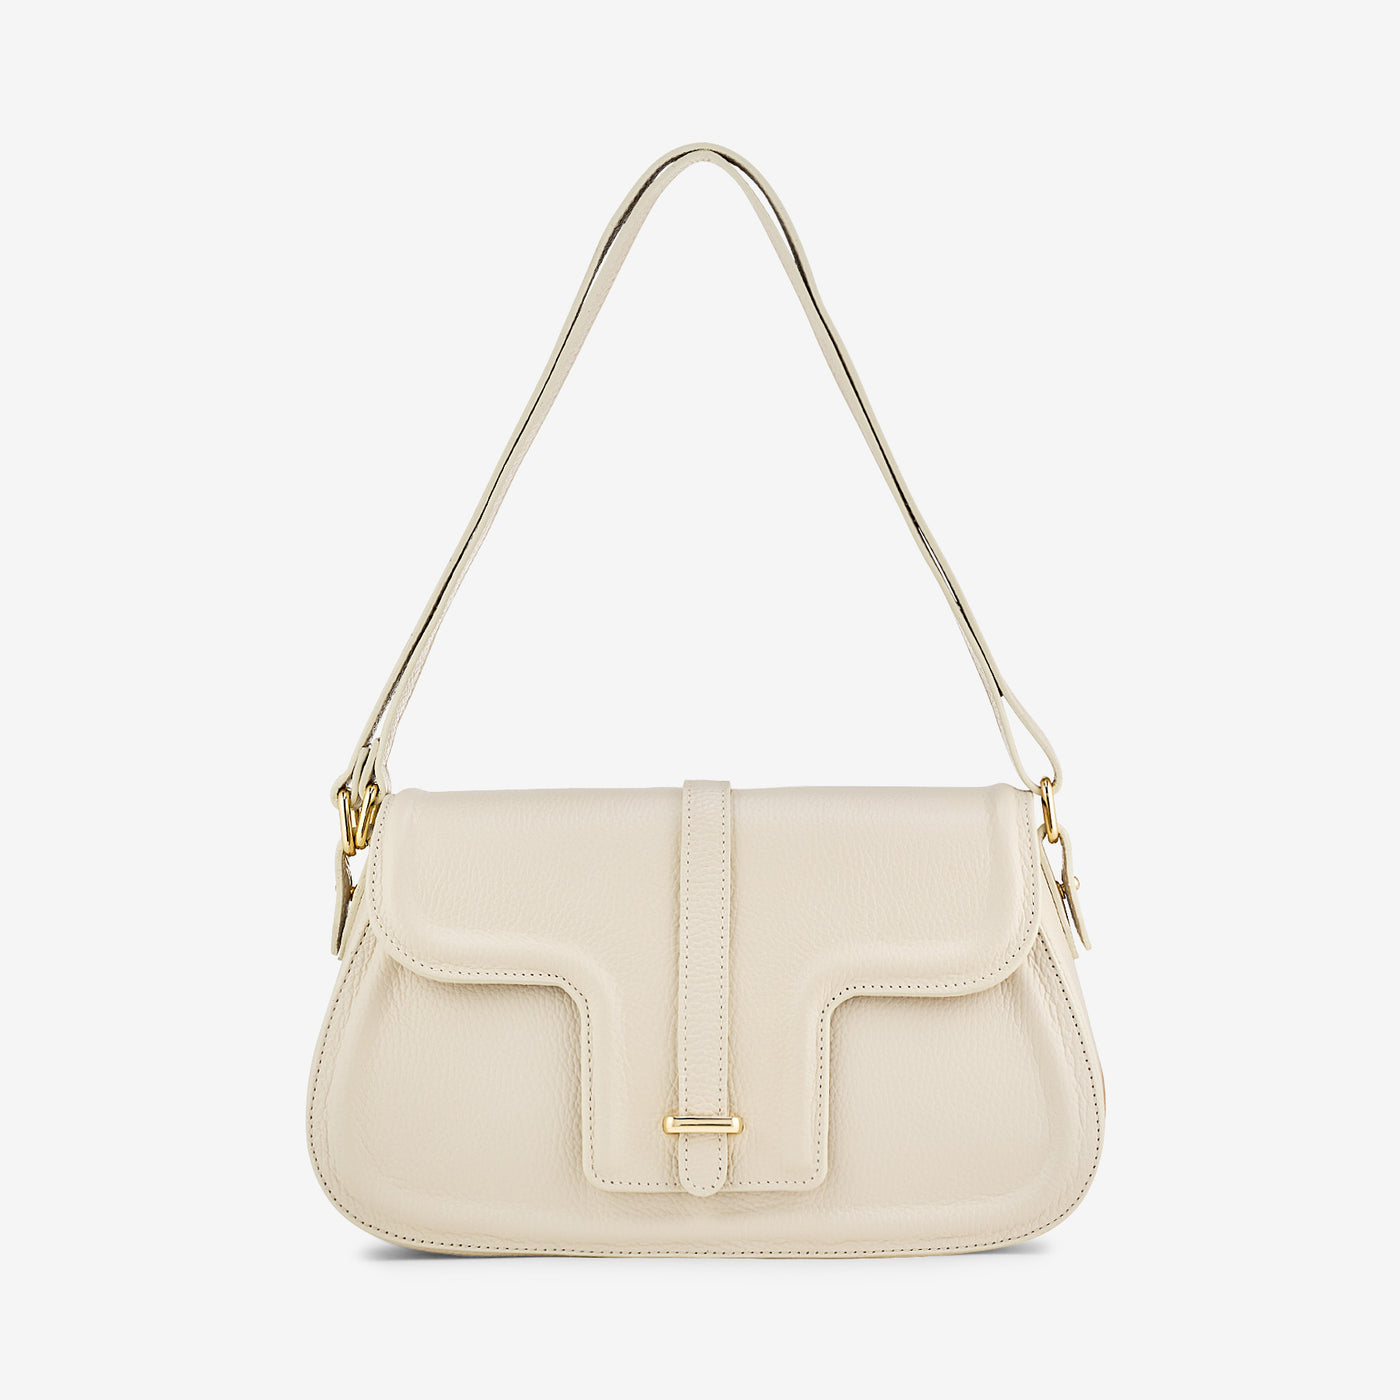 VIAVERDI Ivory Tumbled Leather Bag Made in Italy